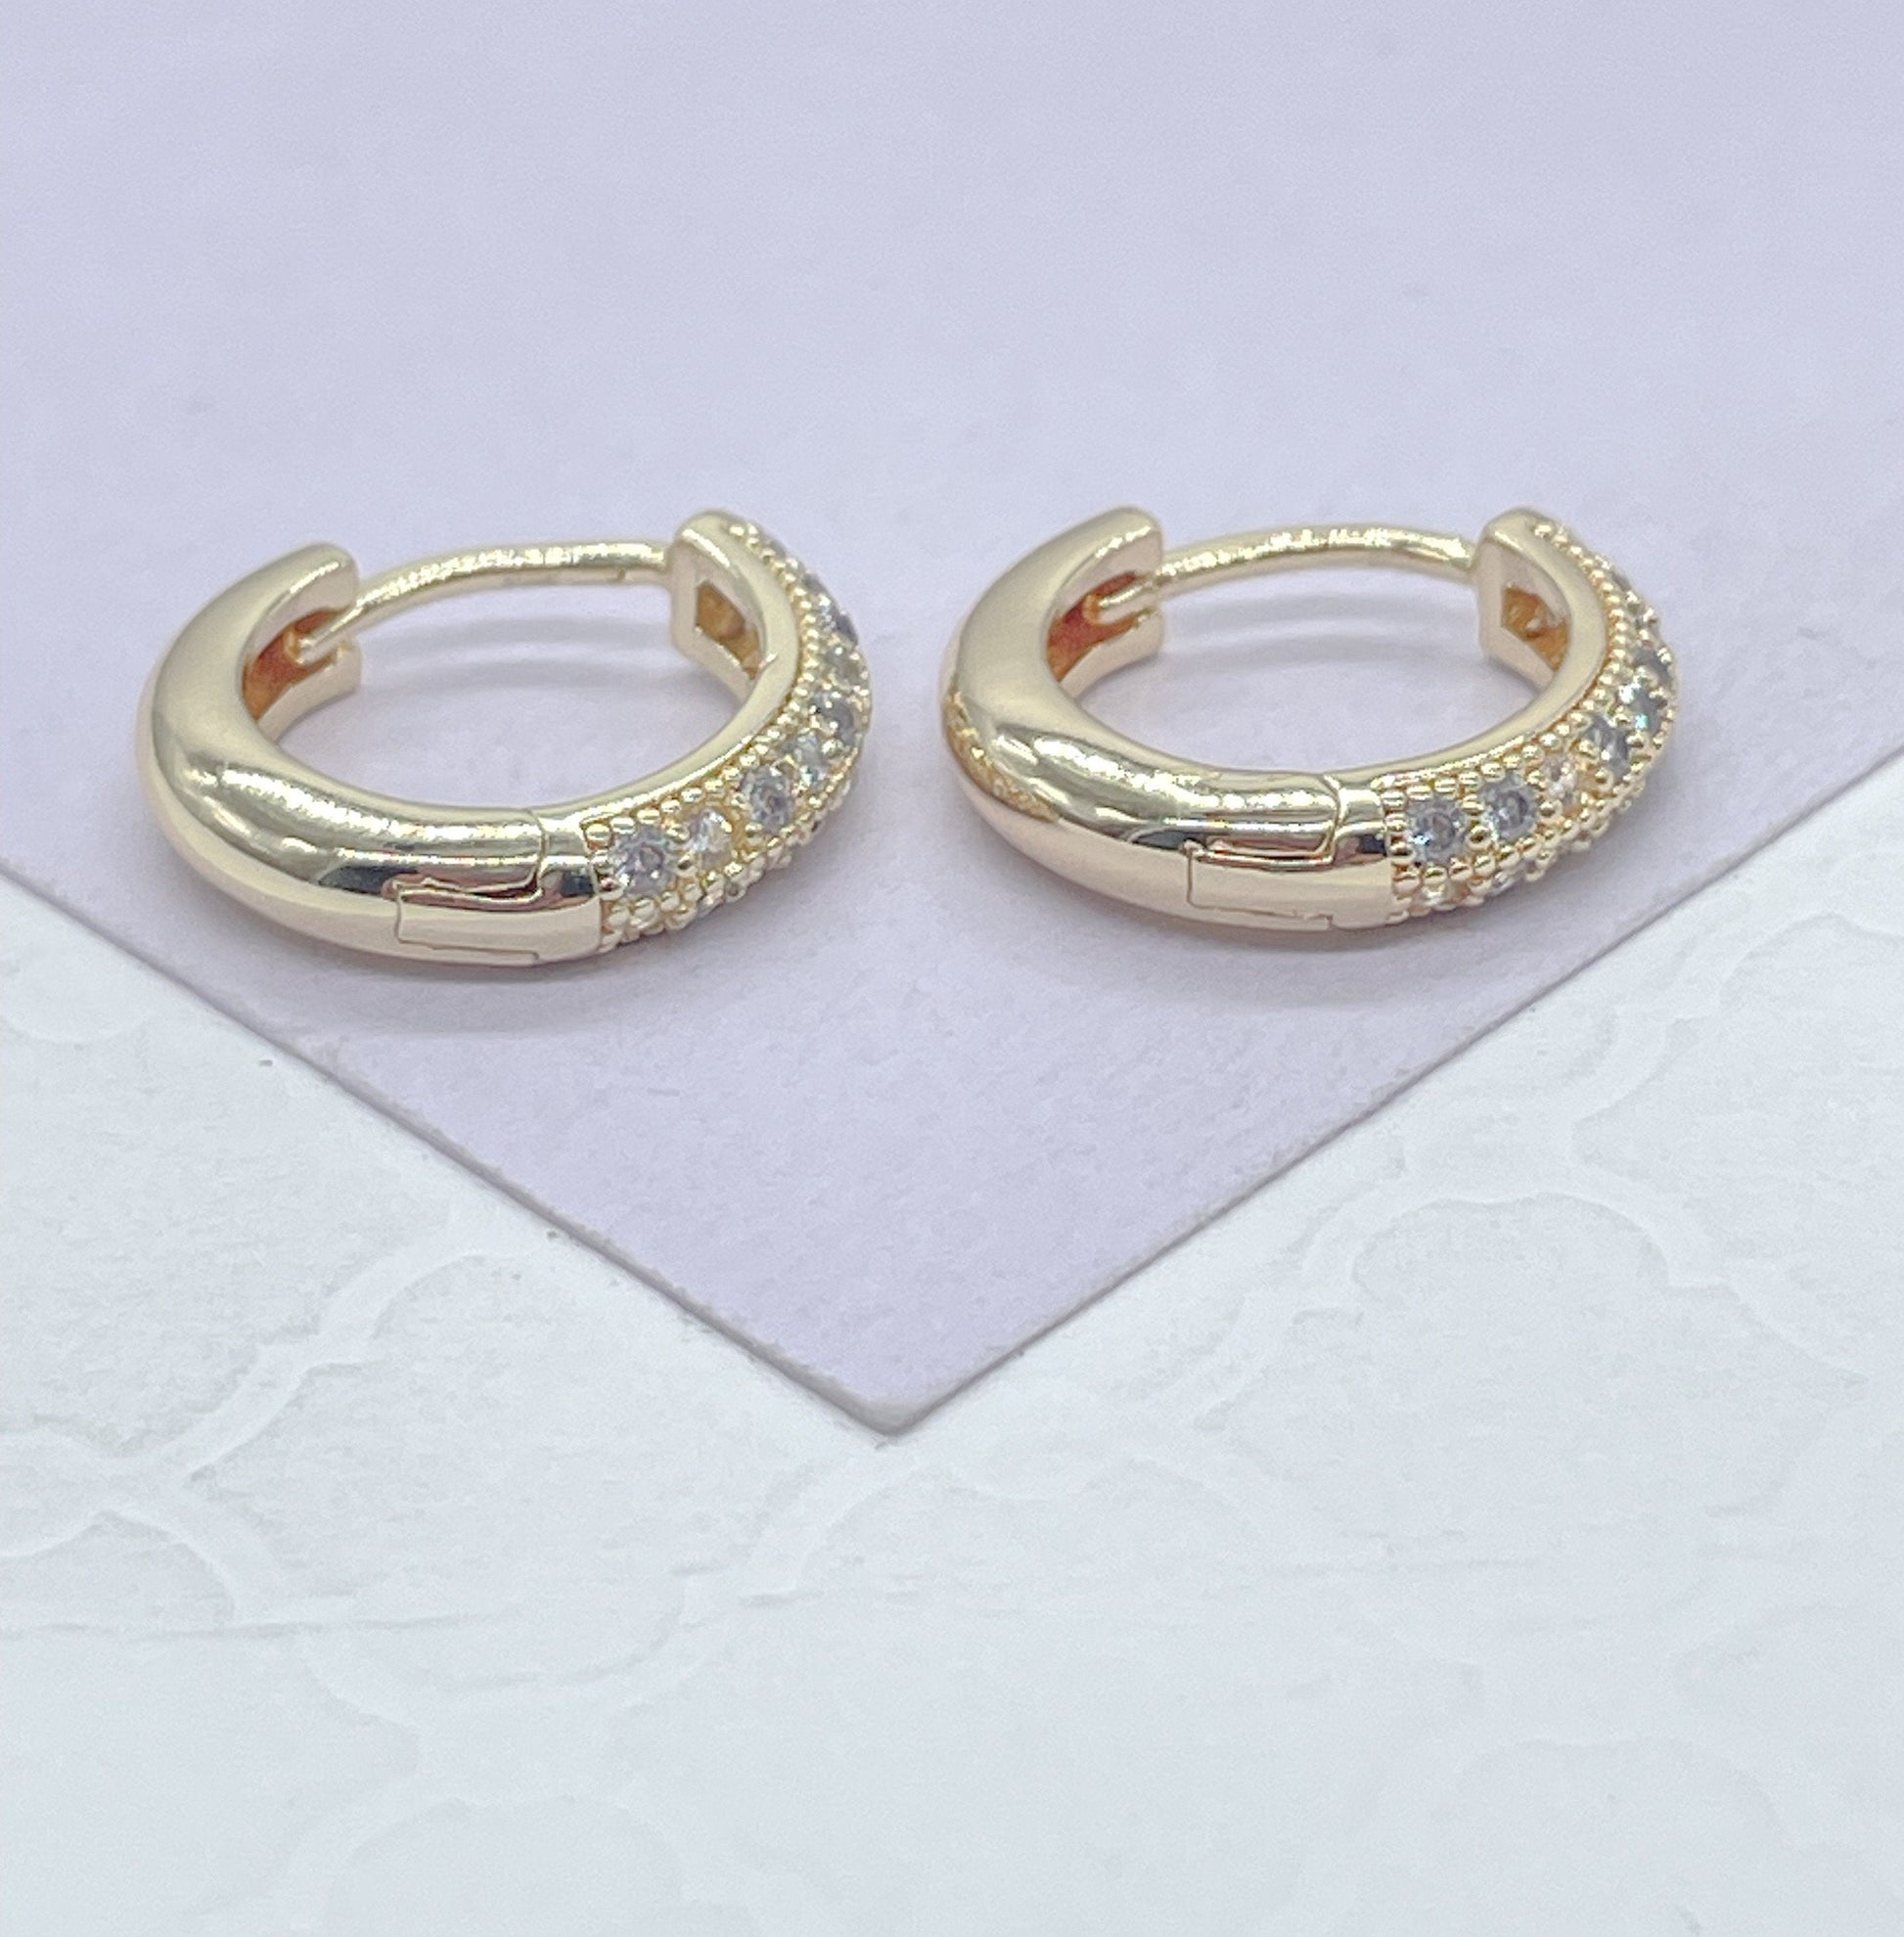 18k Gold Filled Small Huggie with Micro CZ, Gift for Her, Wedding Gift, Dainty Hoops, Dainty Earrings, Kids Earrings,